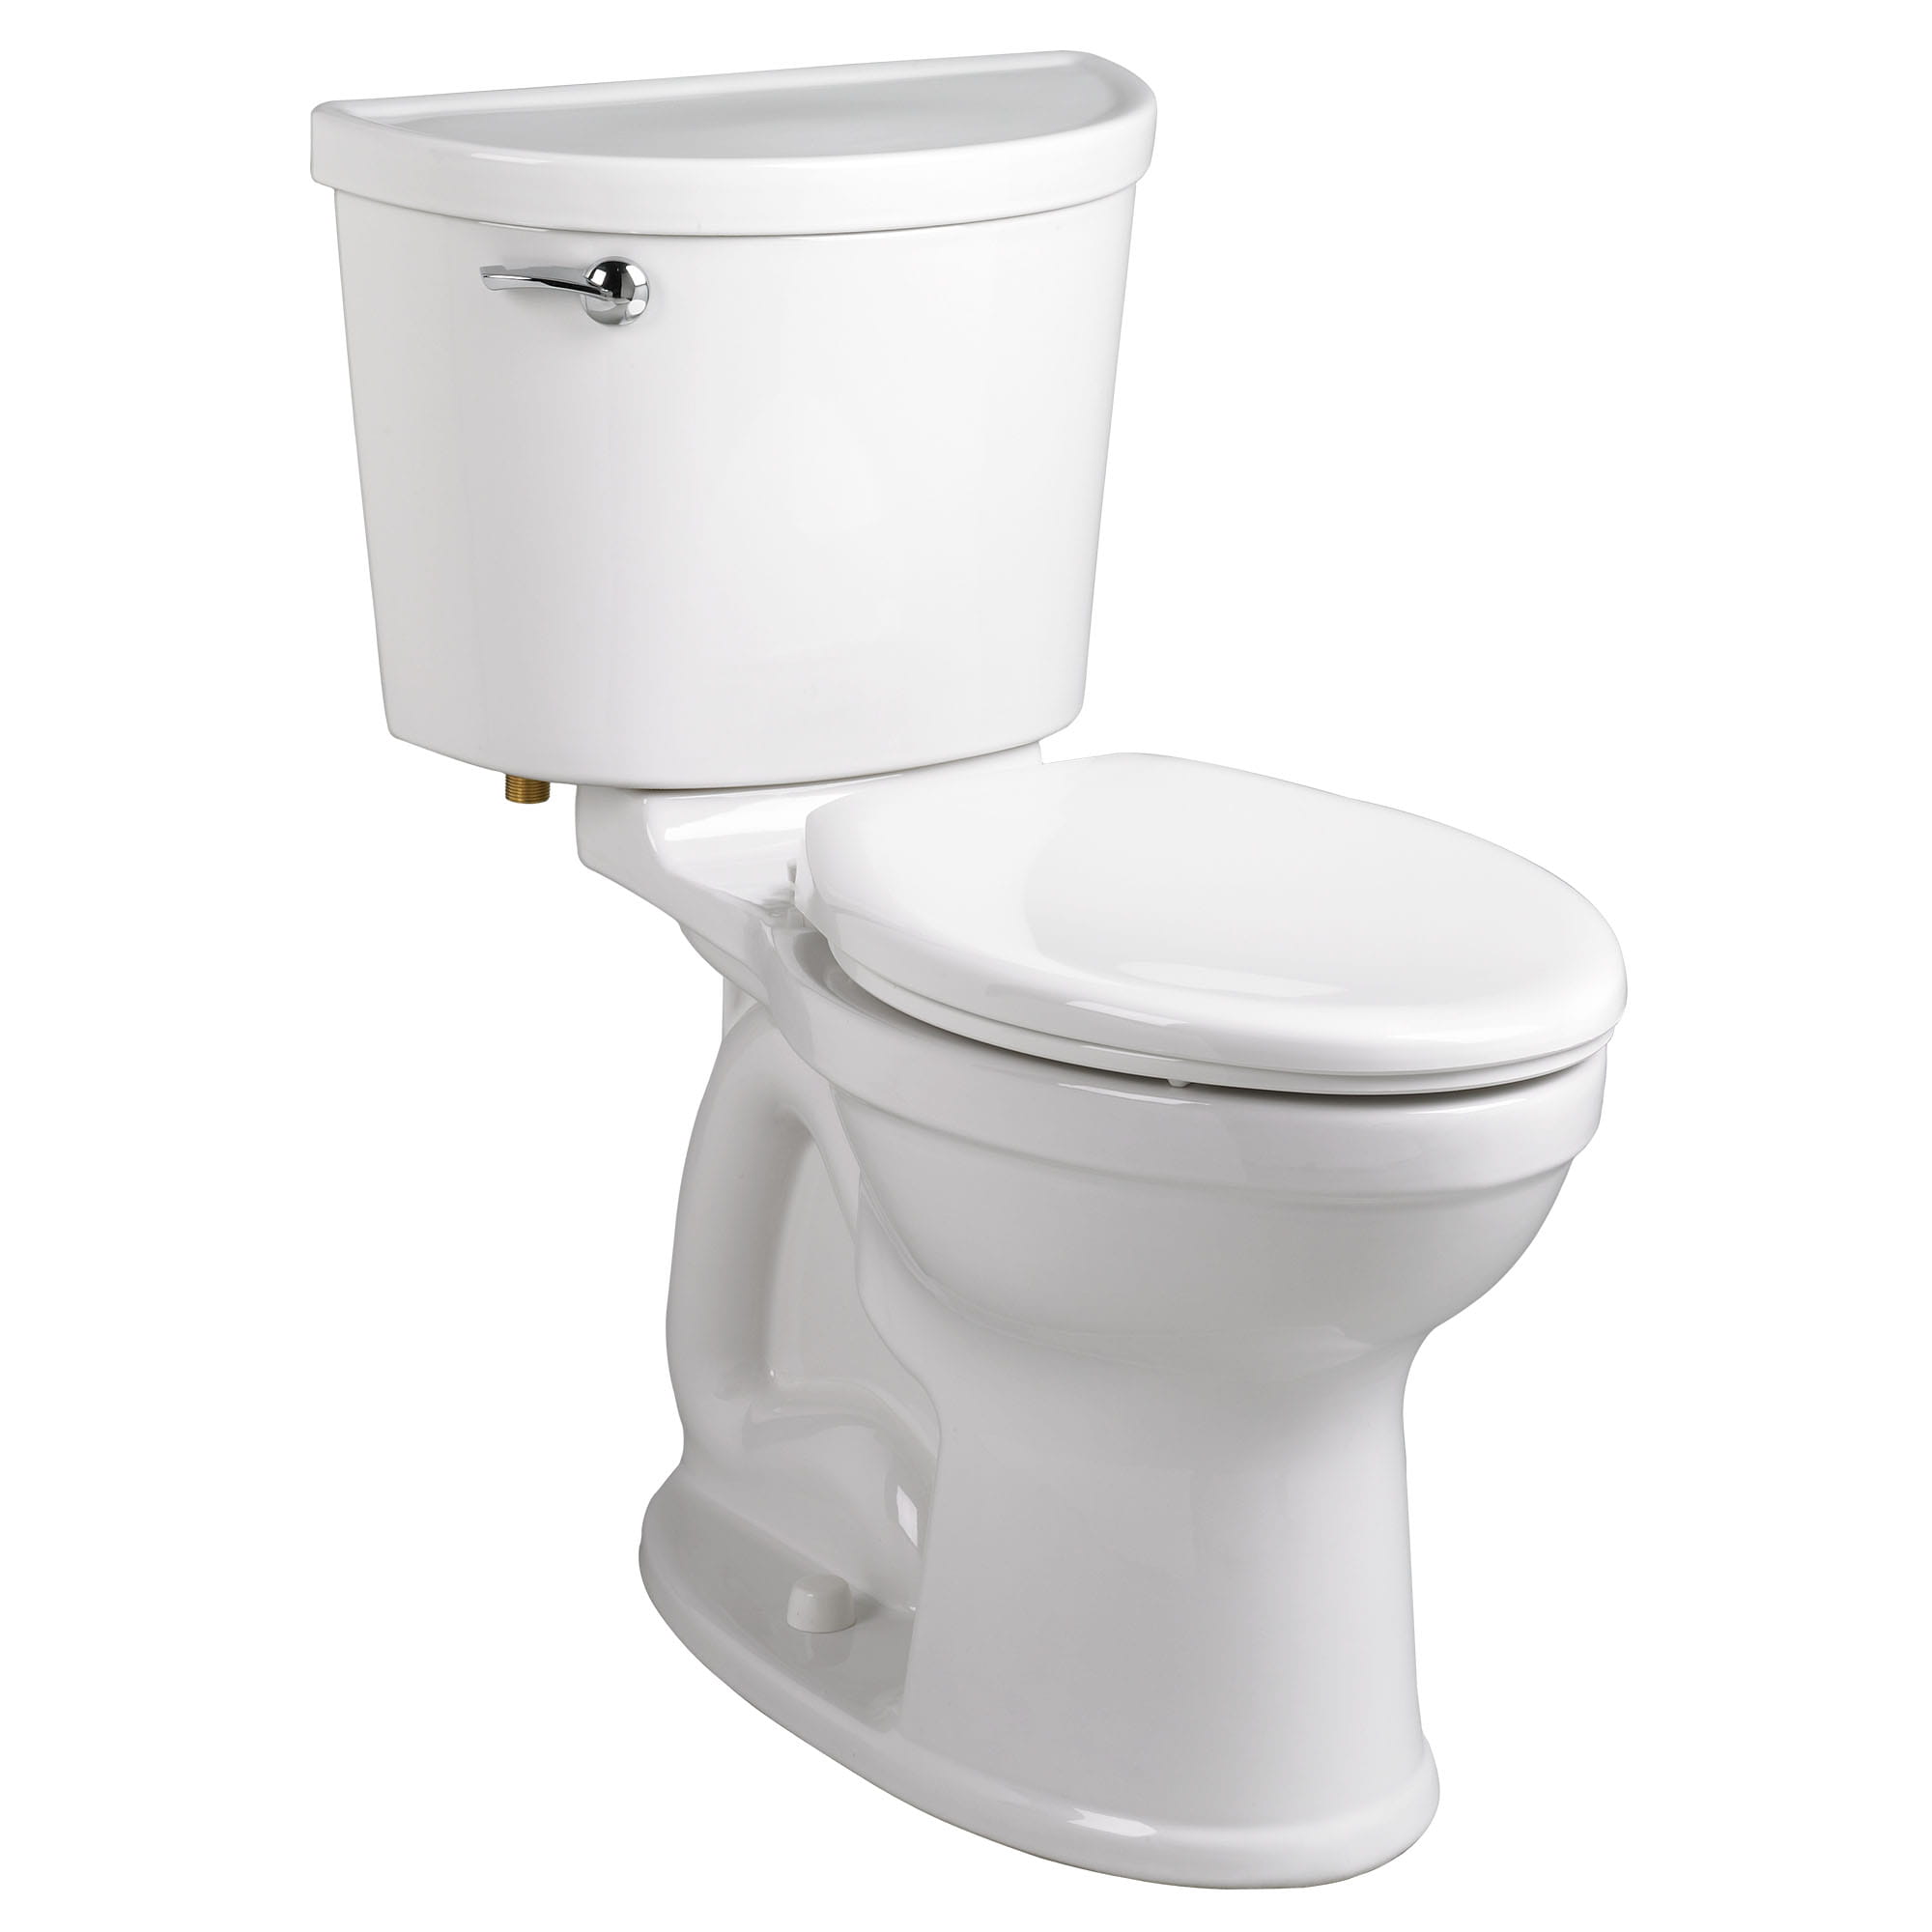 Clean Siphonic 1.6 GPF/6.0 LPF 1.0 GPF/3.8 LPF Dual Flush 16-1/2-in.  Elongated-Front Toilet with Seat